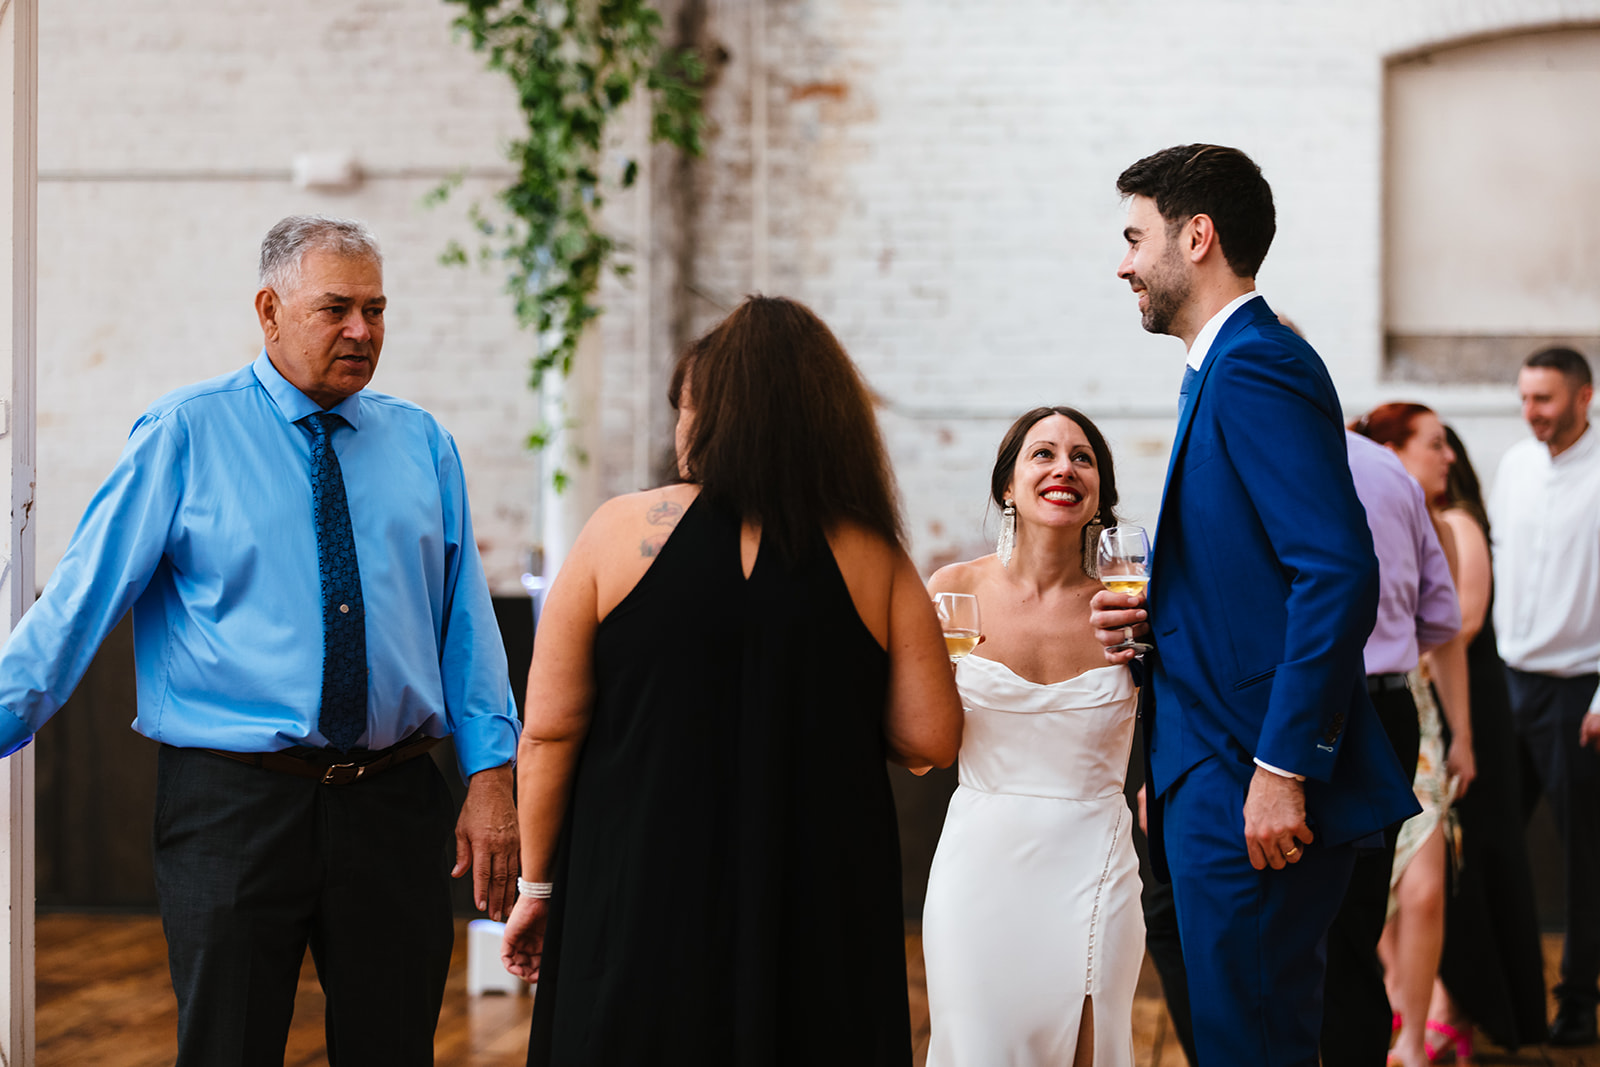 Guests mingle at the Greylock Works Wedding